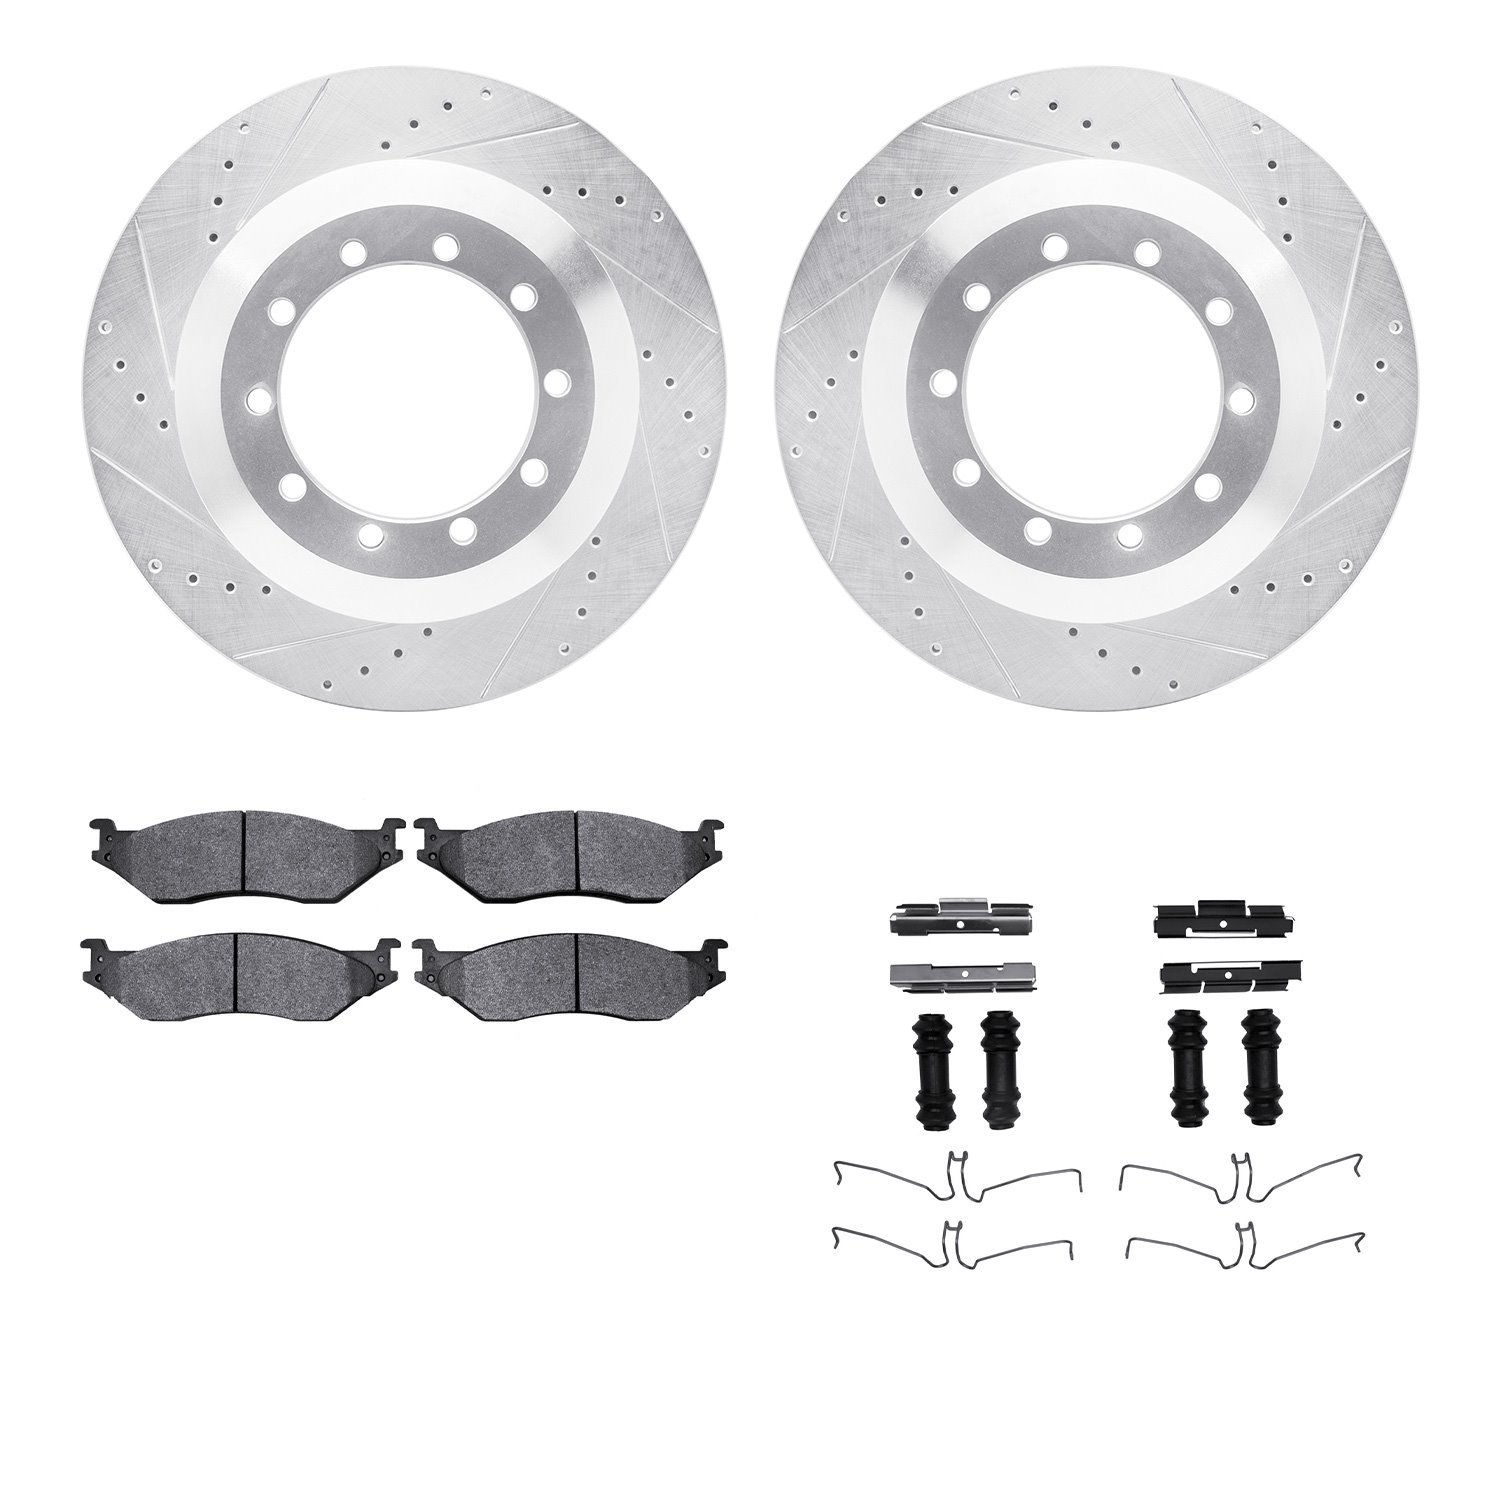 7412-54046 Drilled/Slotted Brake Rotors with Ultimate-Duty Brake Pads Kit & Hardware [Silver], 2006-2019 Ford/Lincoln/Mercury/Ma